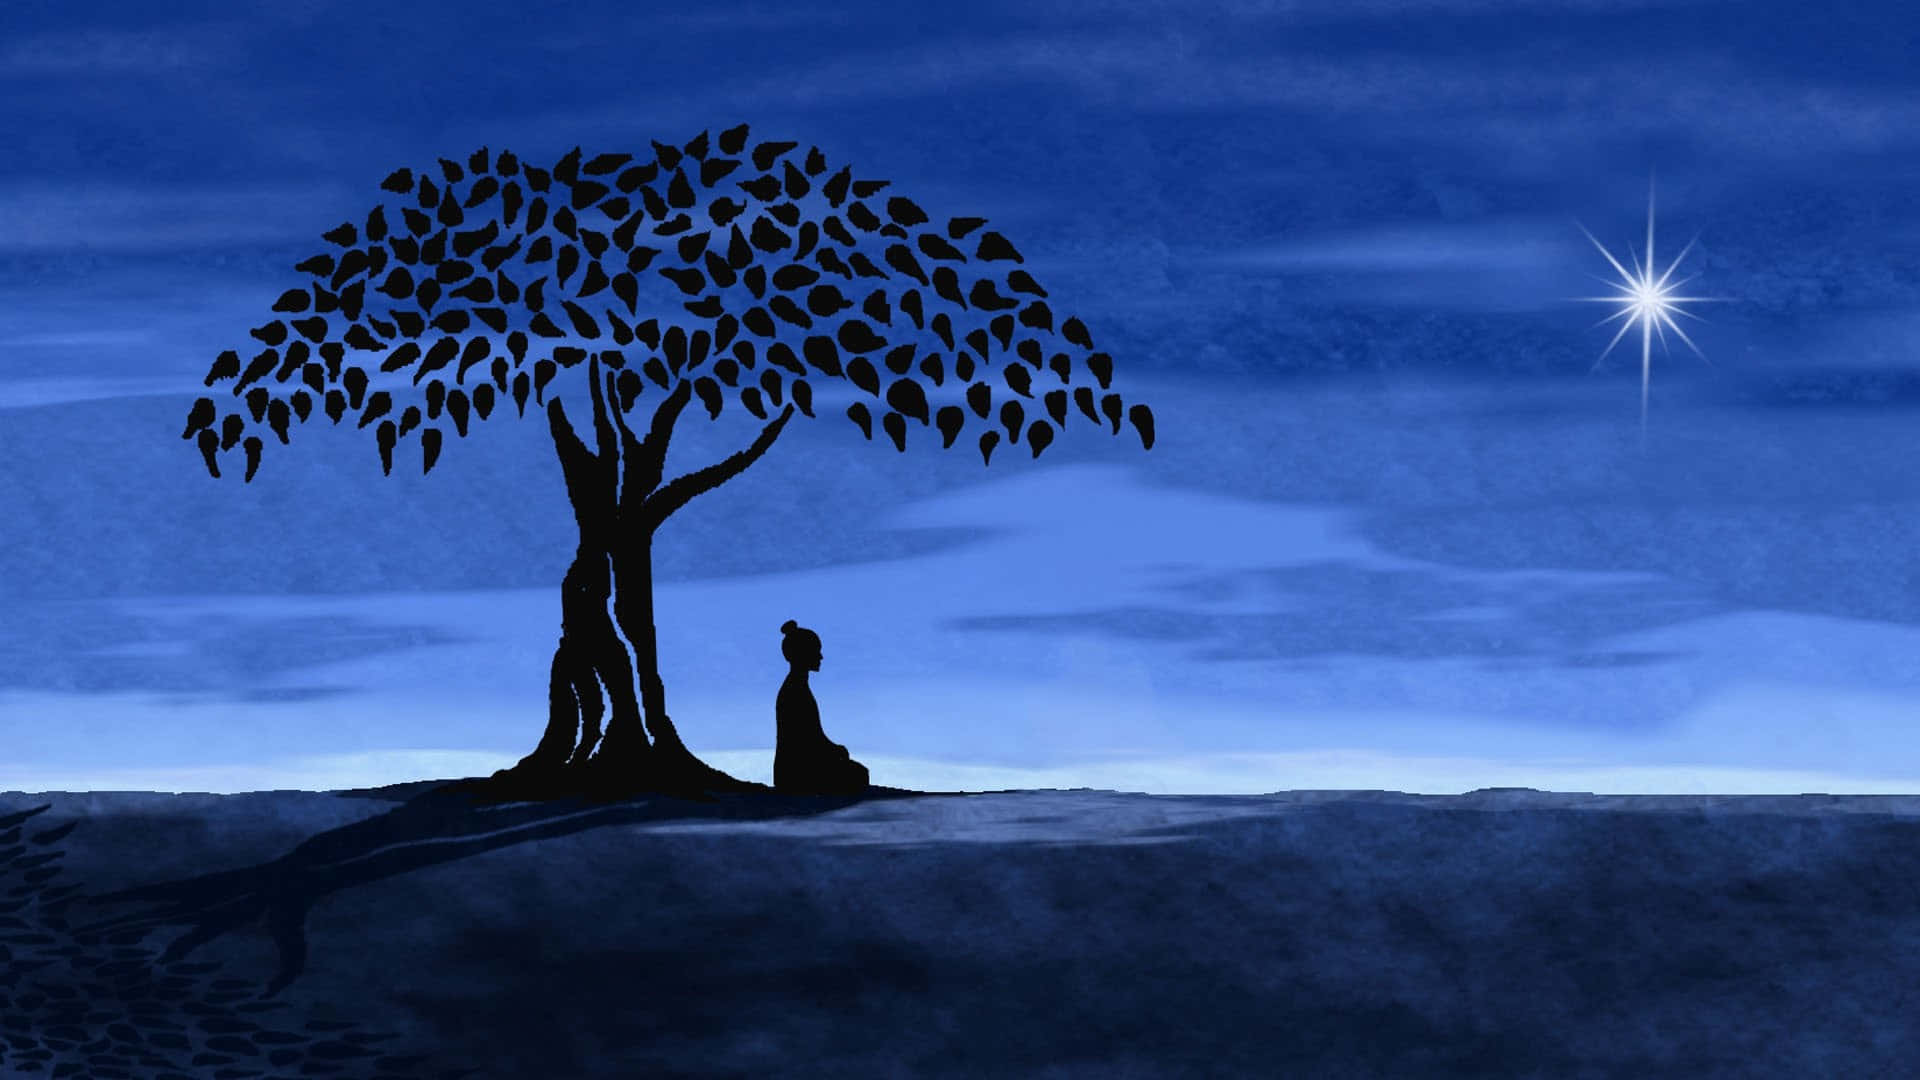 A Man Sitting Under A Tree With A Star In The Sky